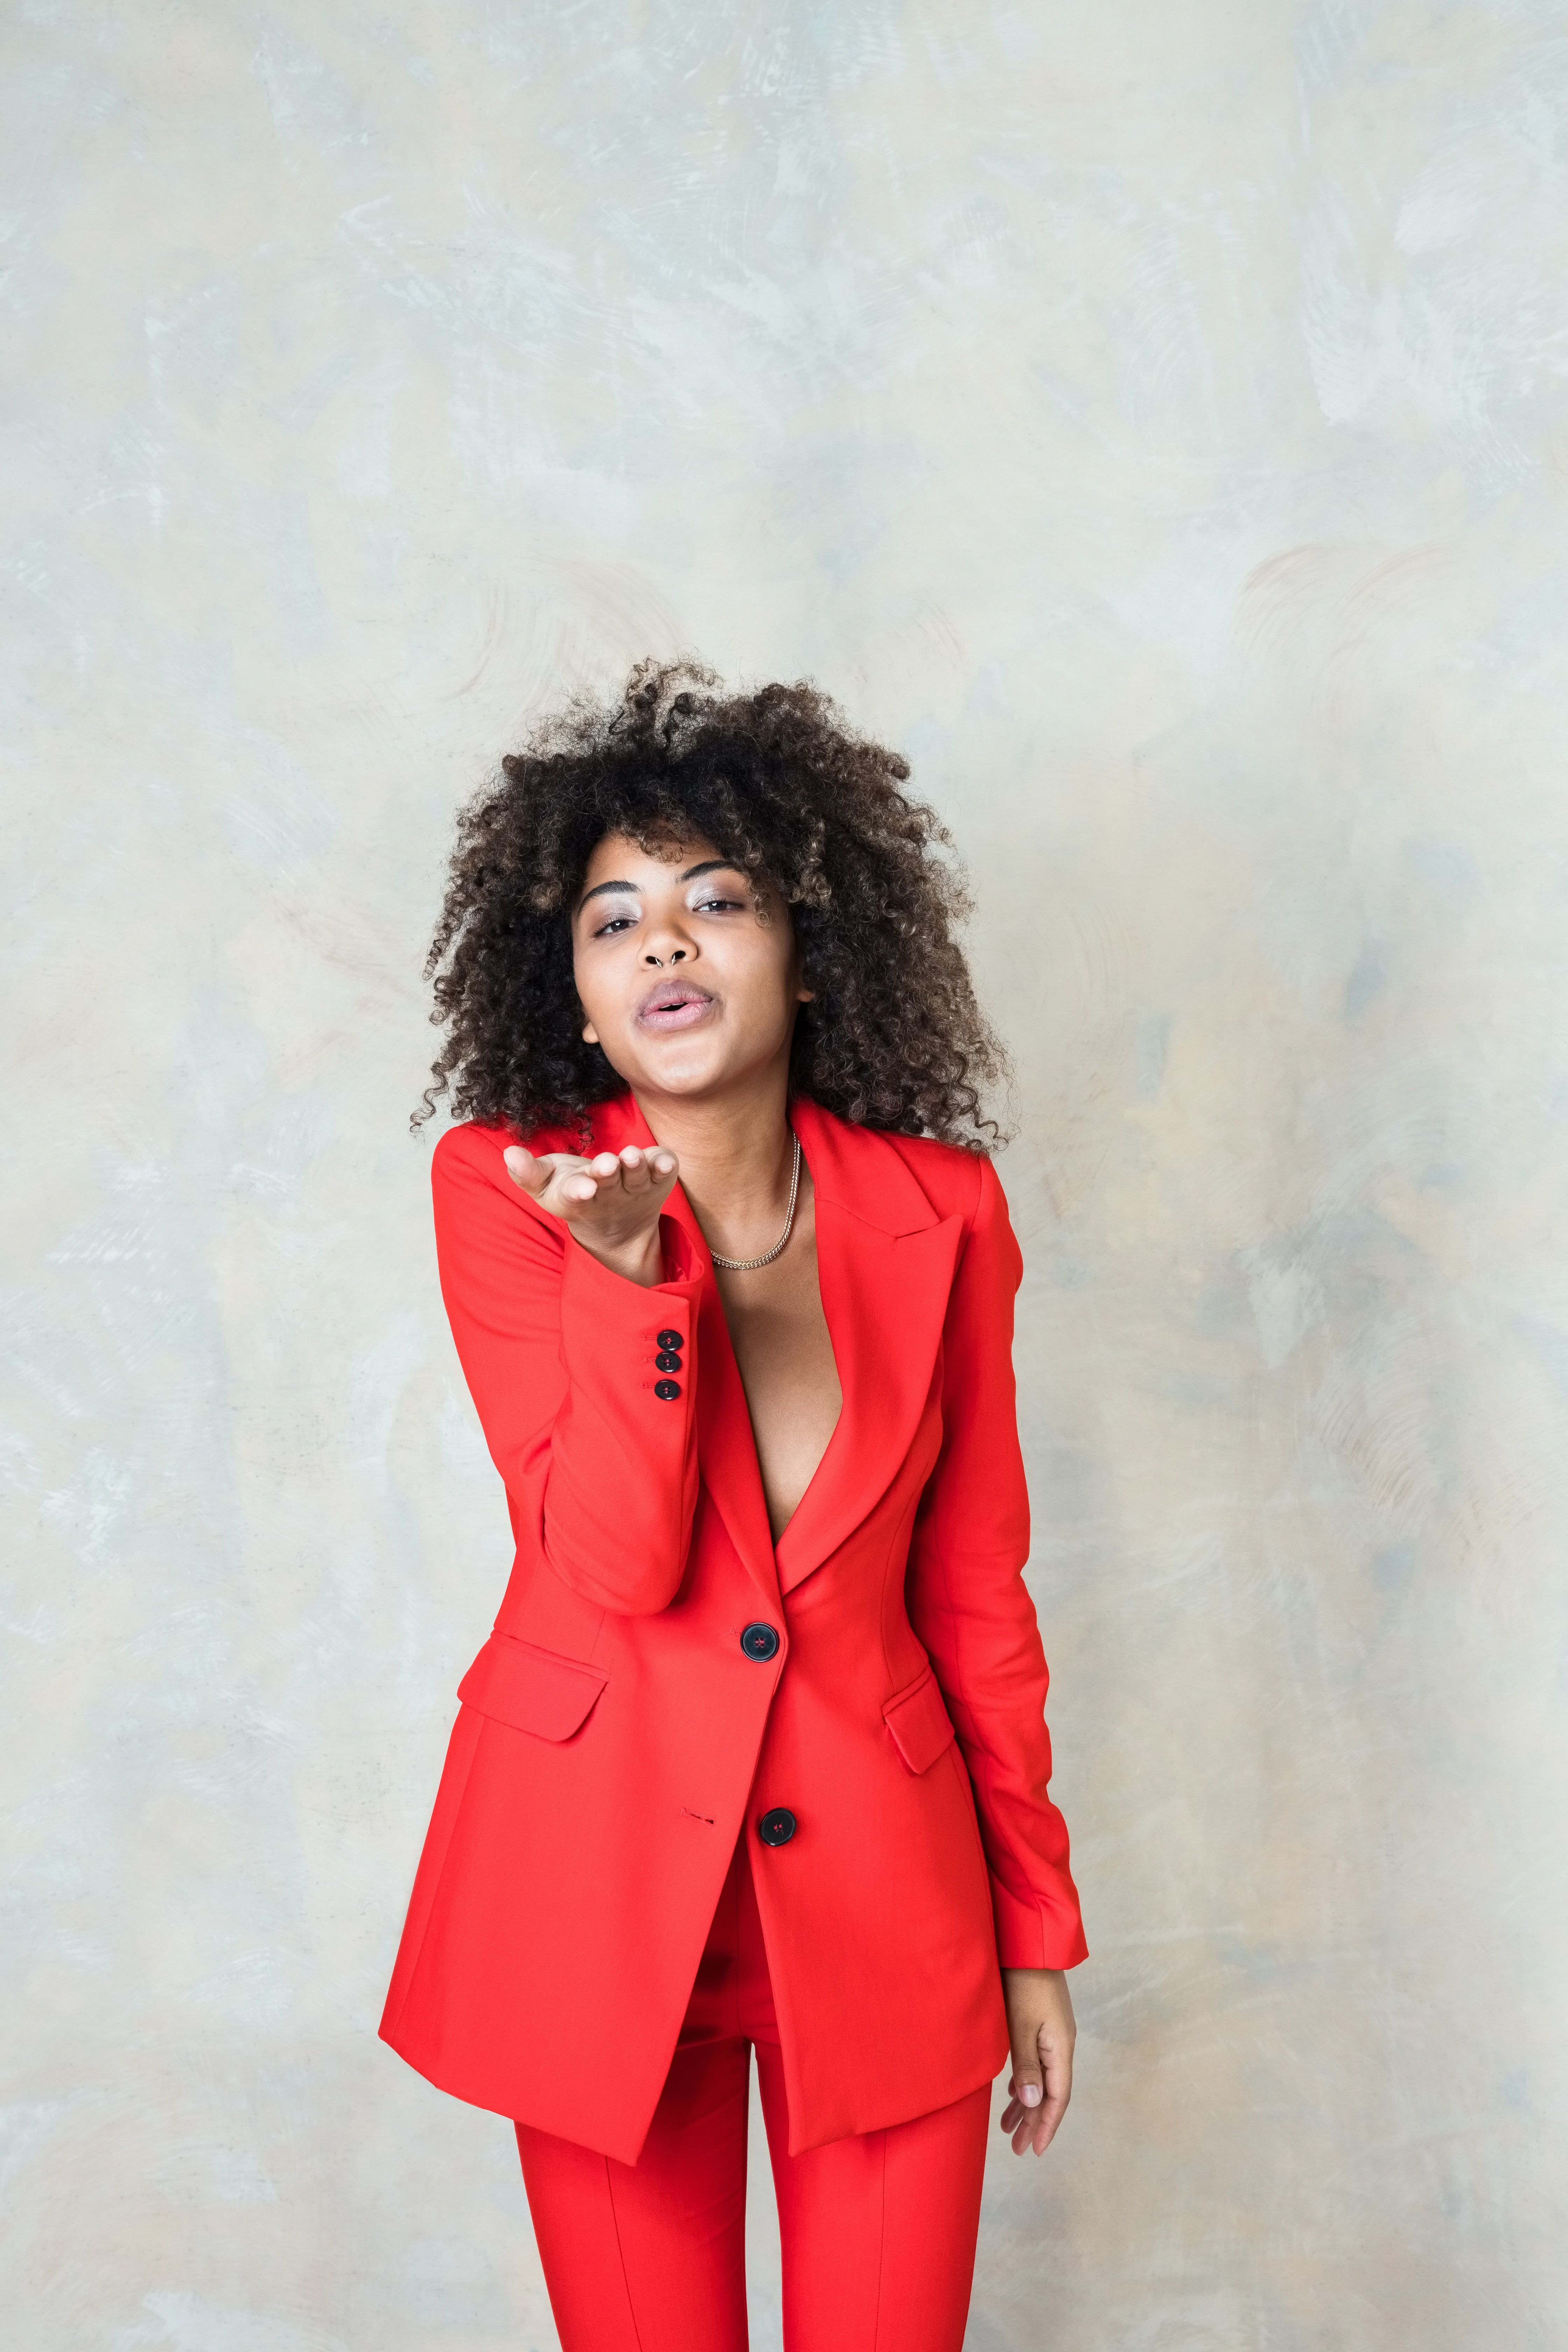 Young-woman-wearing-red-suit-blowing-a-kiss